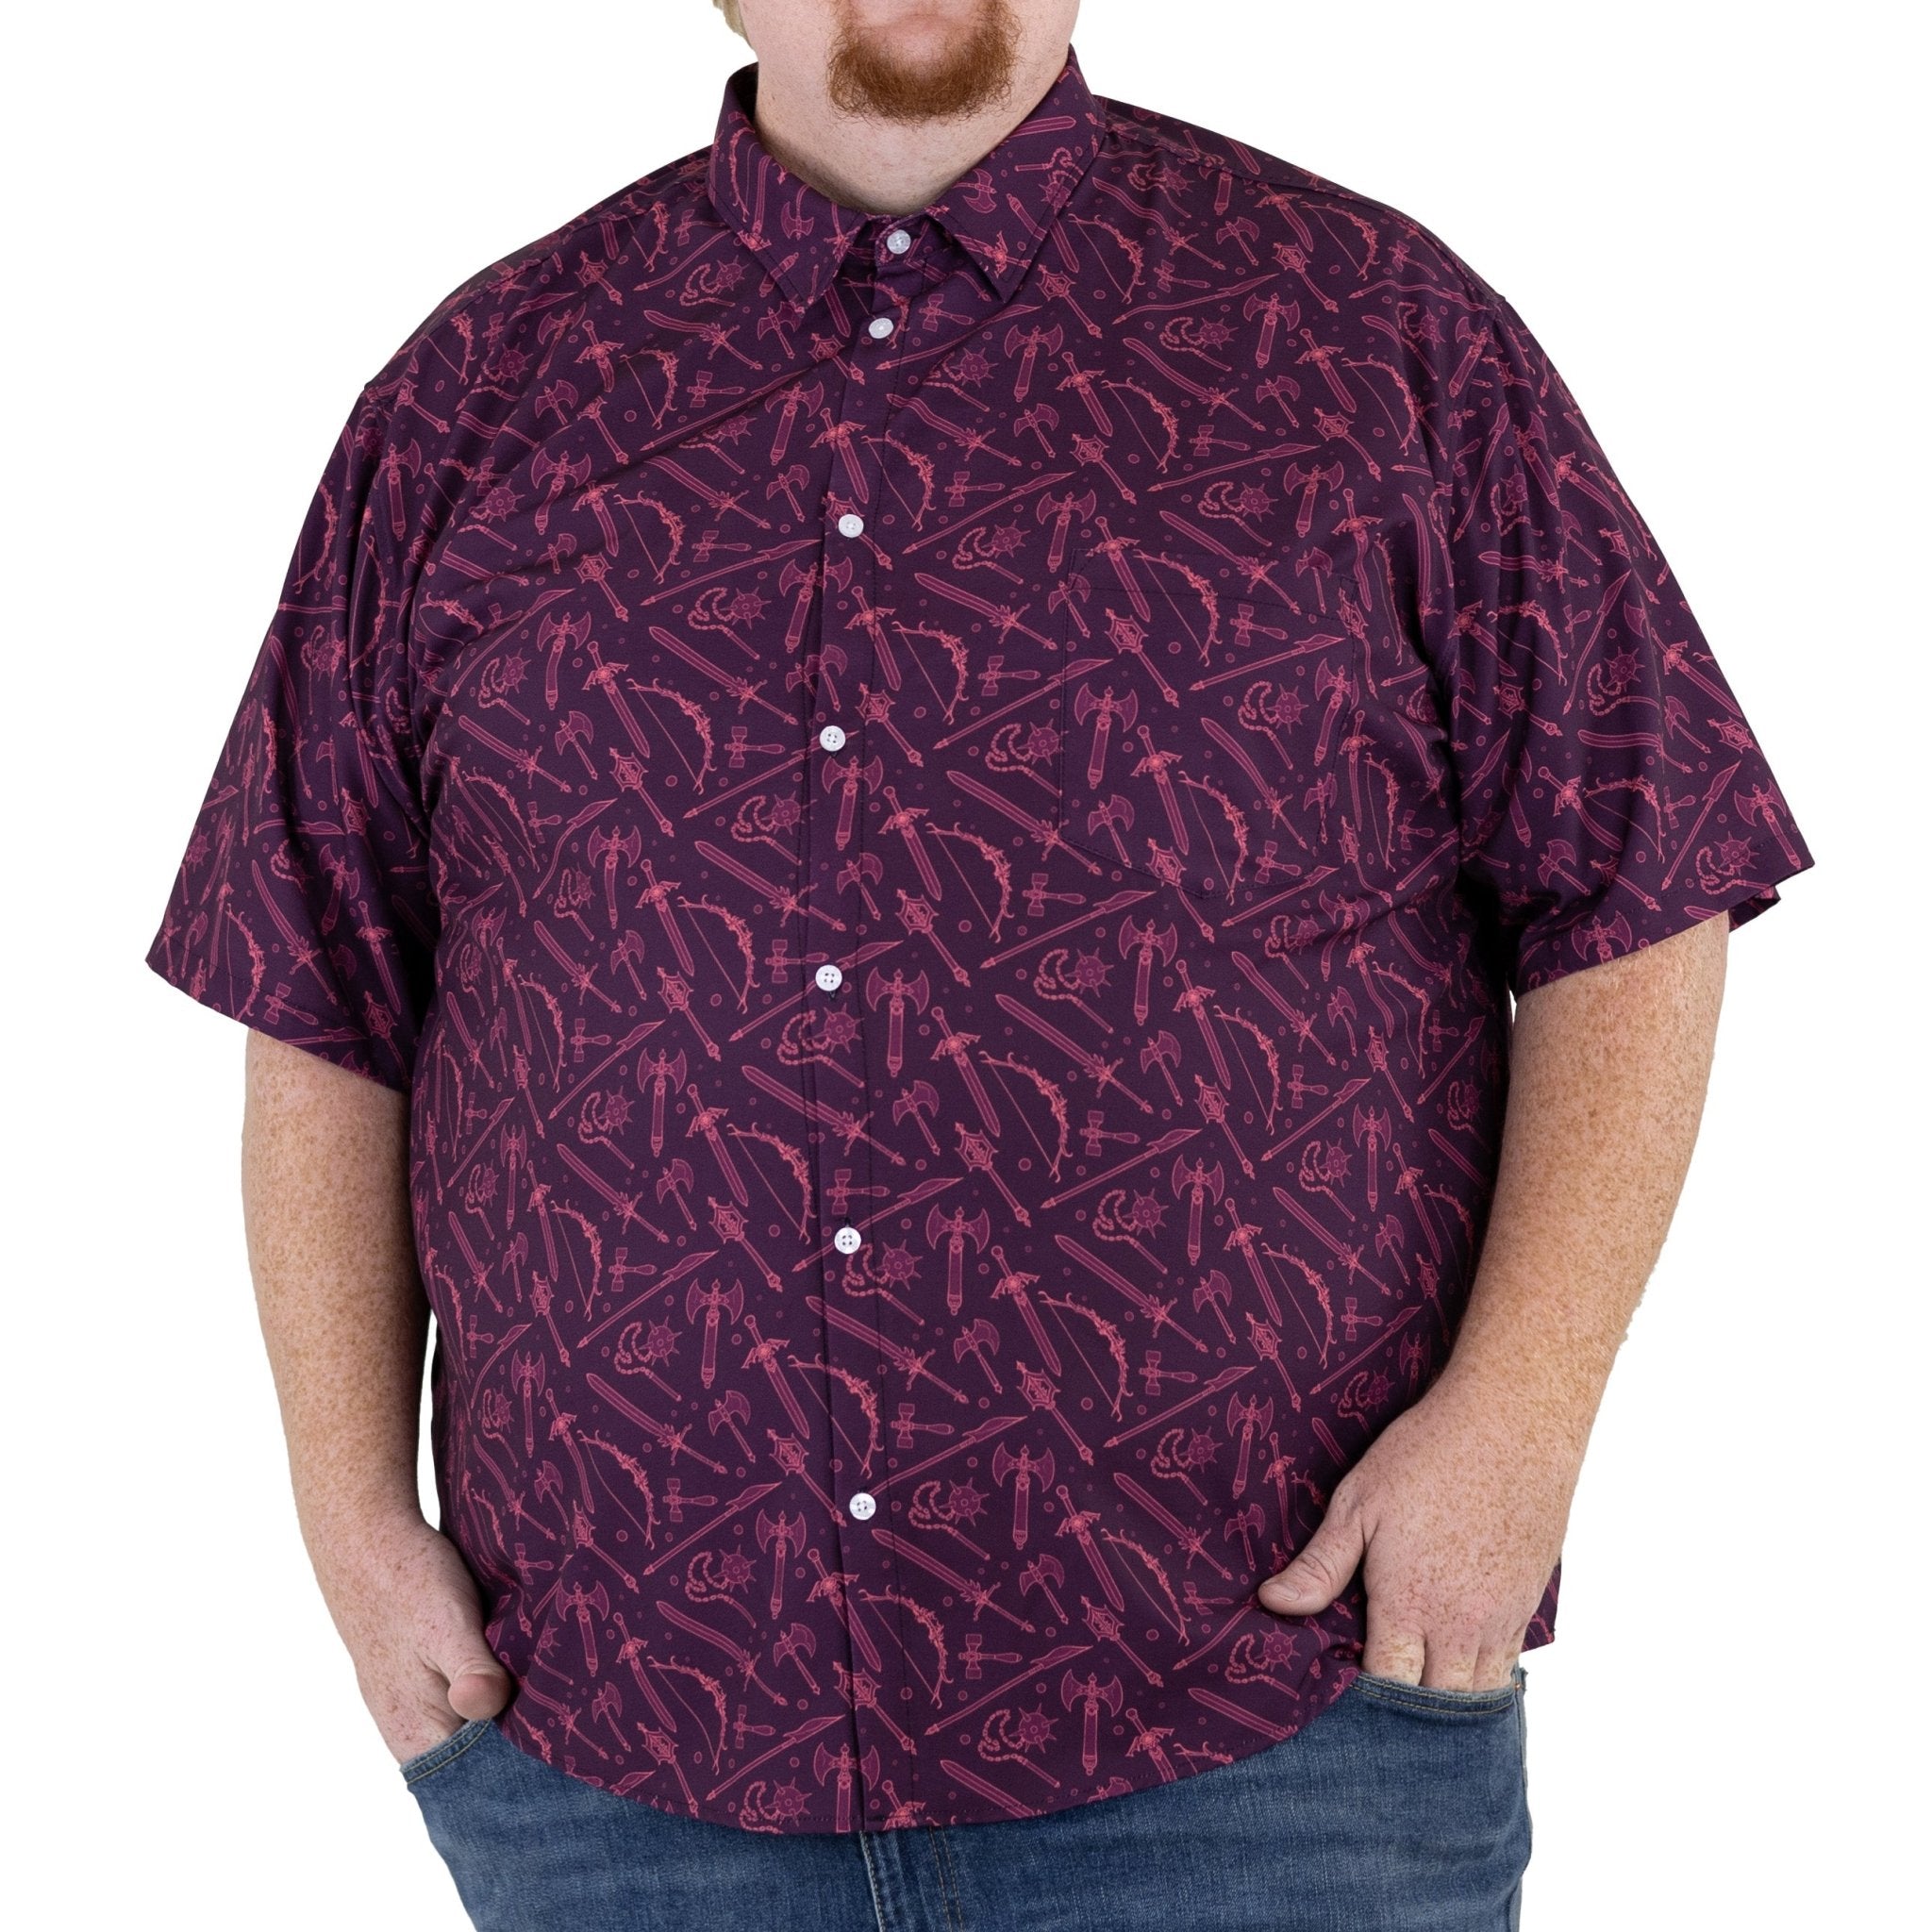 Ready-to-Ship Dnd Medieval Weapons Button Up Shirt - adult sizing - dnd & rpg print - ready-to-ship